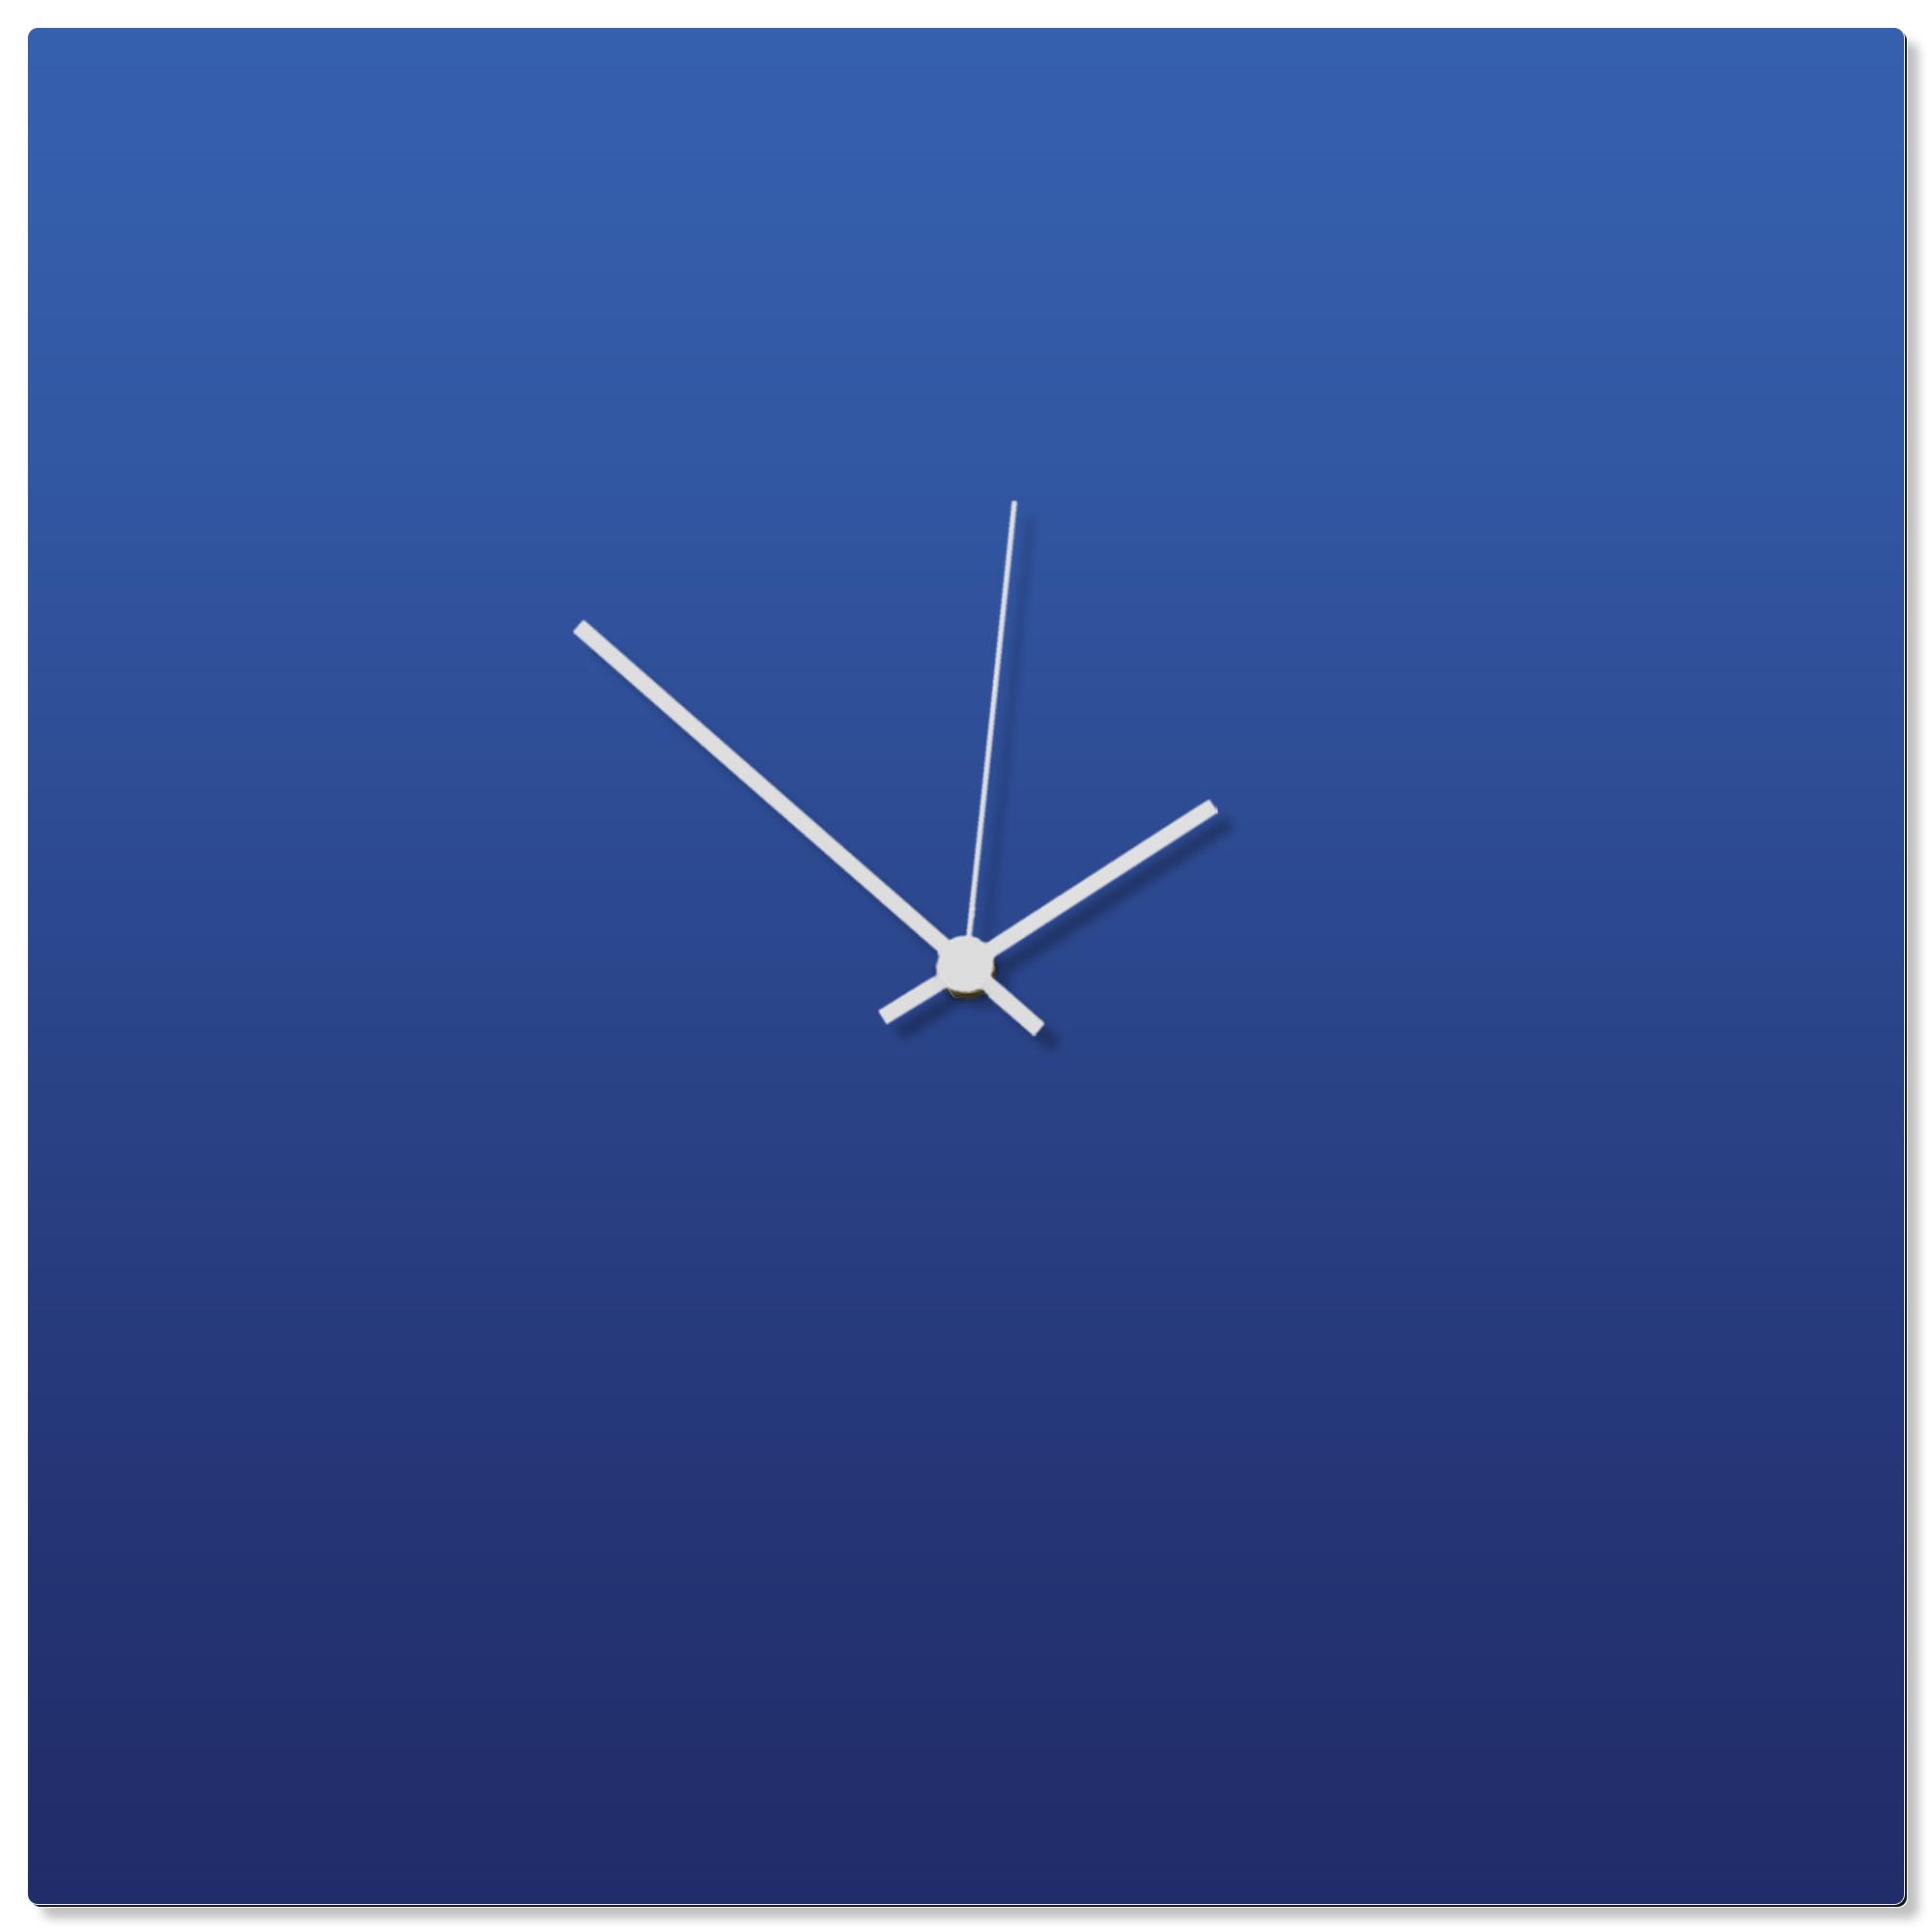 Blueout White Square Clock Large 23x23in. Aluminum Polymetal